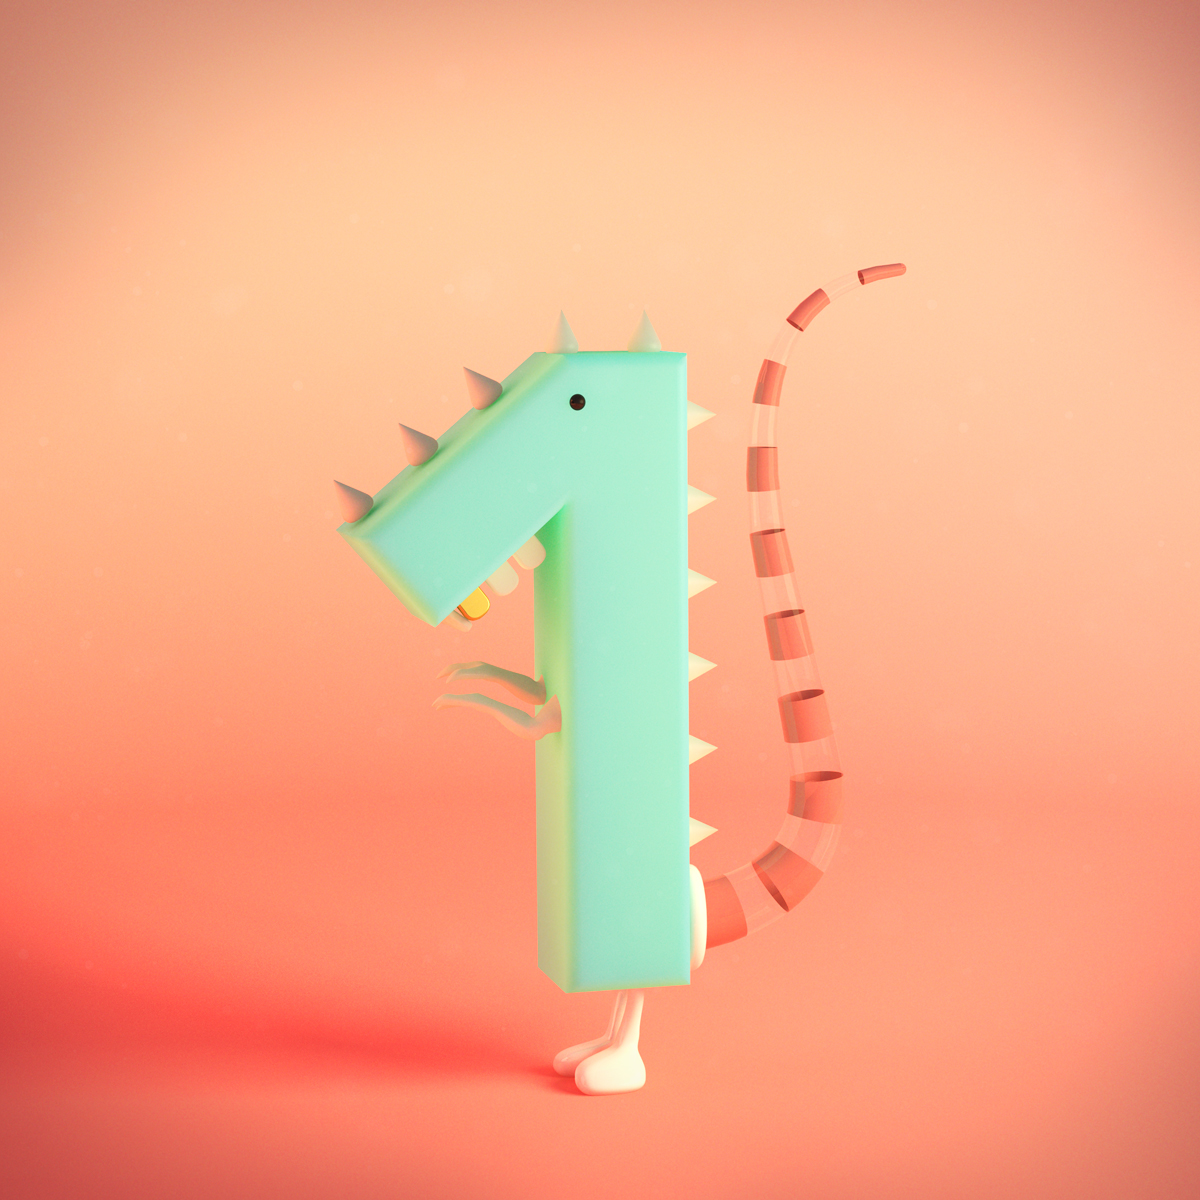 ilustracion 36daysoftype numbers colorfull art toy 1 2 3 4 5 6 7 8 9 lobster wings girl ring long arms